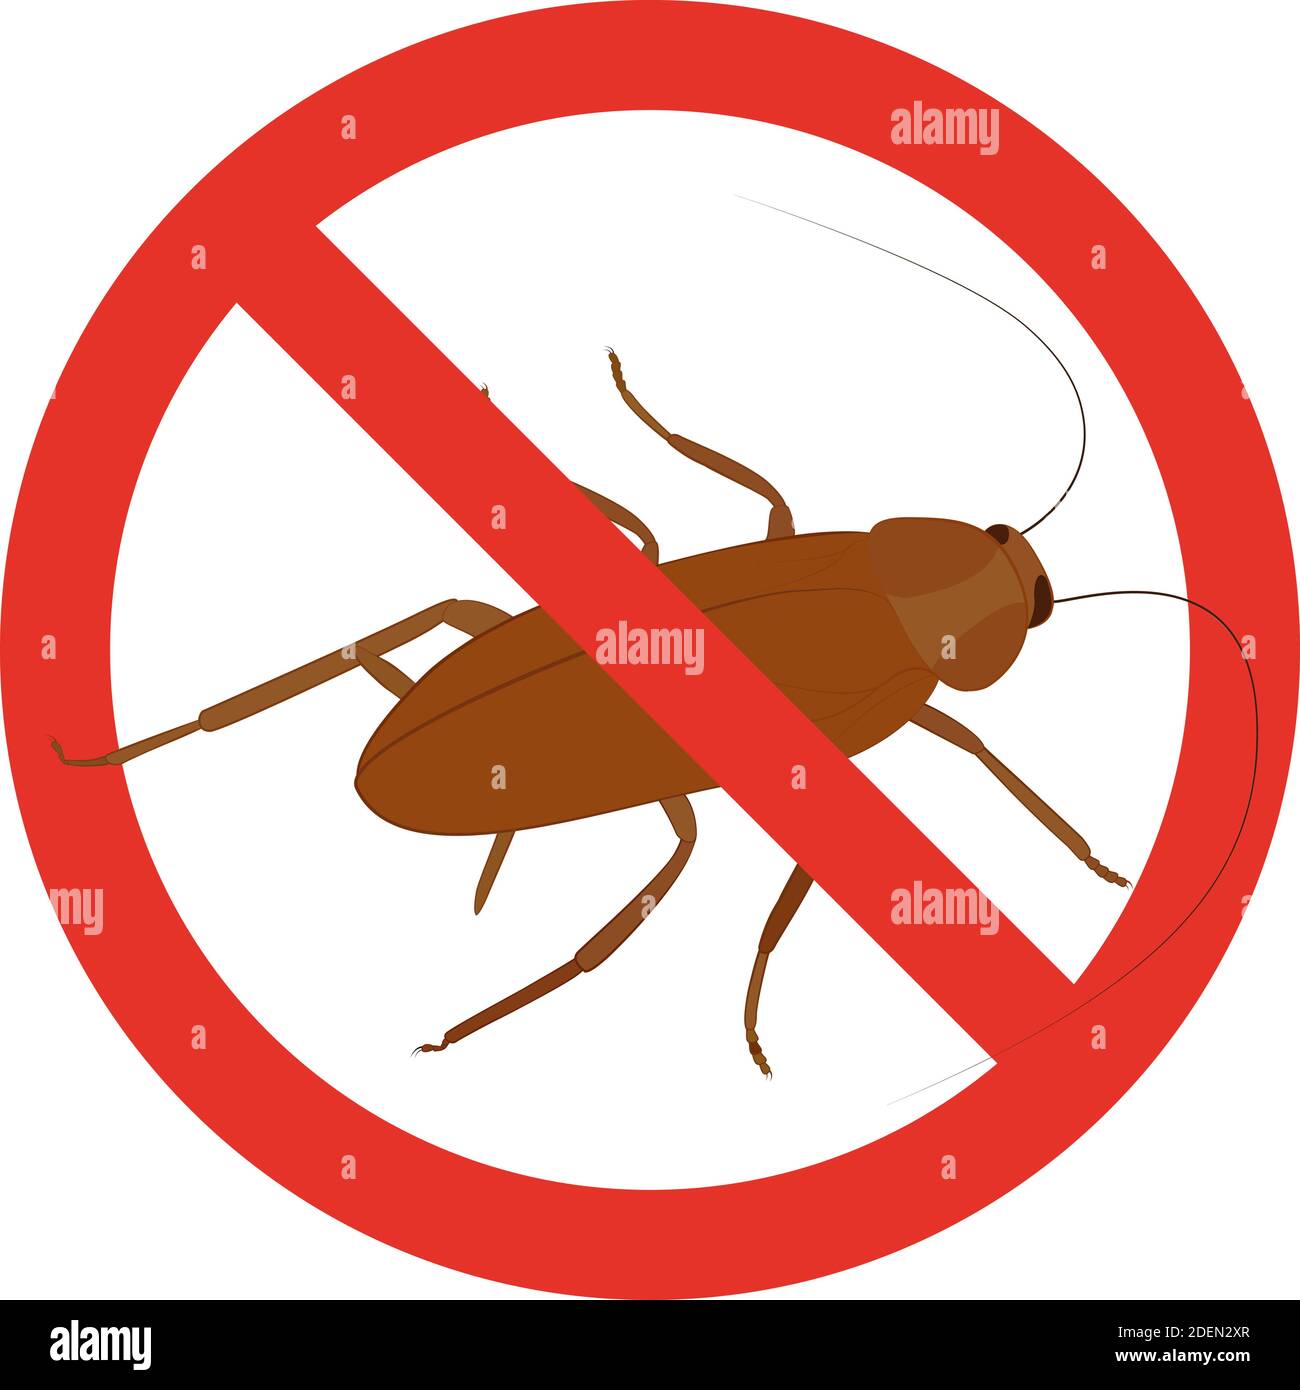 Stop cockroach cartoon icon with red circle. No insects symbol. Vector anti bugs sign illustration Isolated on white. Stock Vector